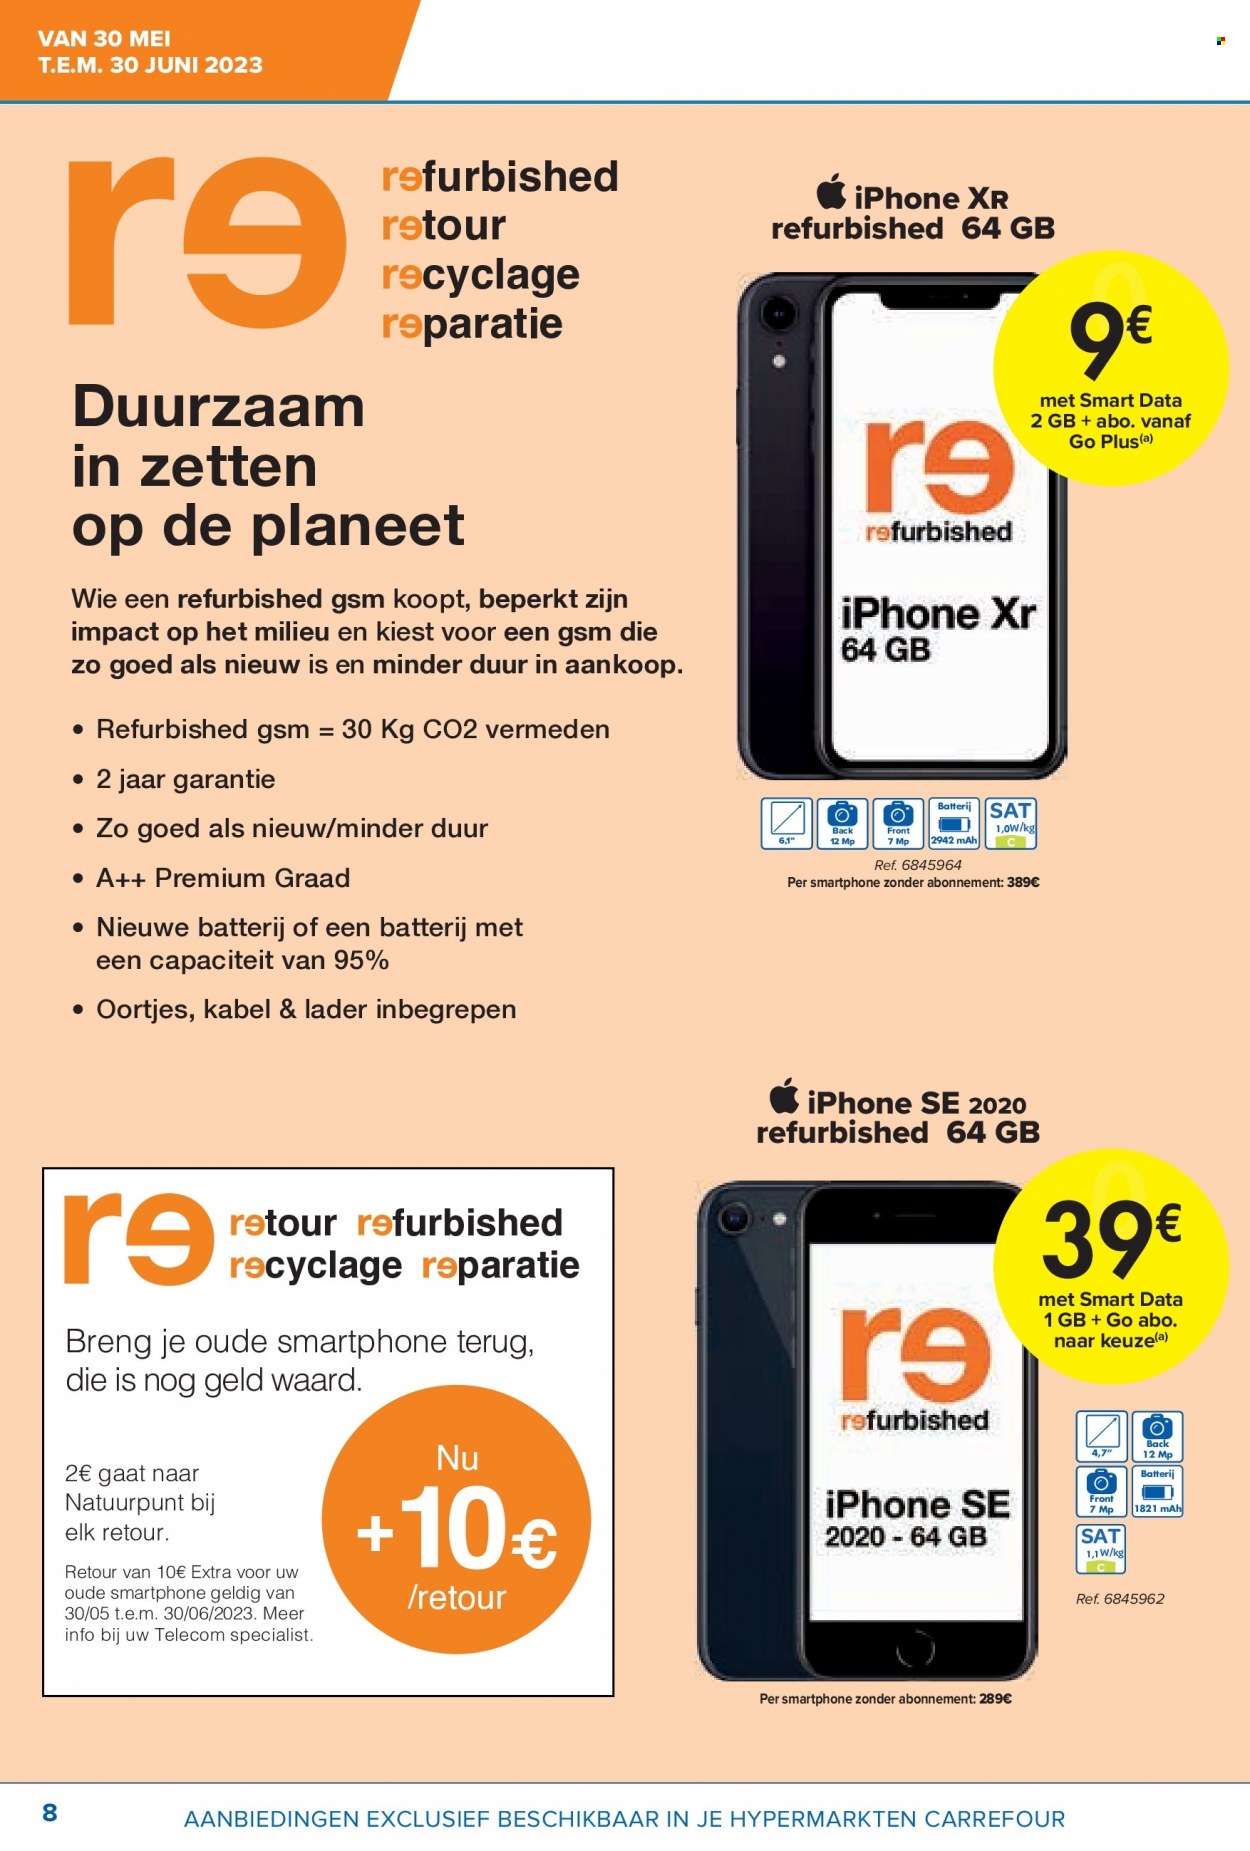 Catalogue Carrefour hypermarkt - 30.5.2023 - 30.6.2023. Page 8.